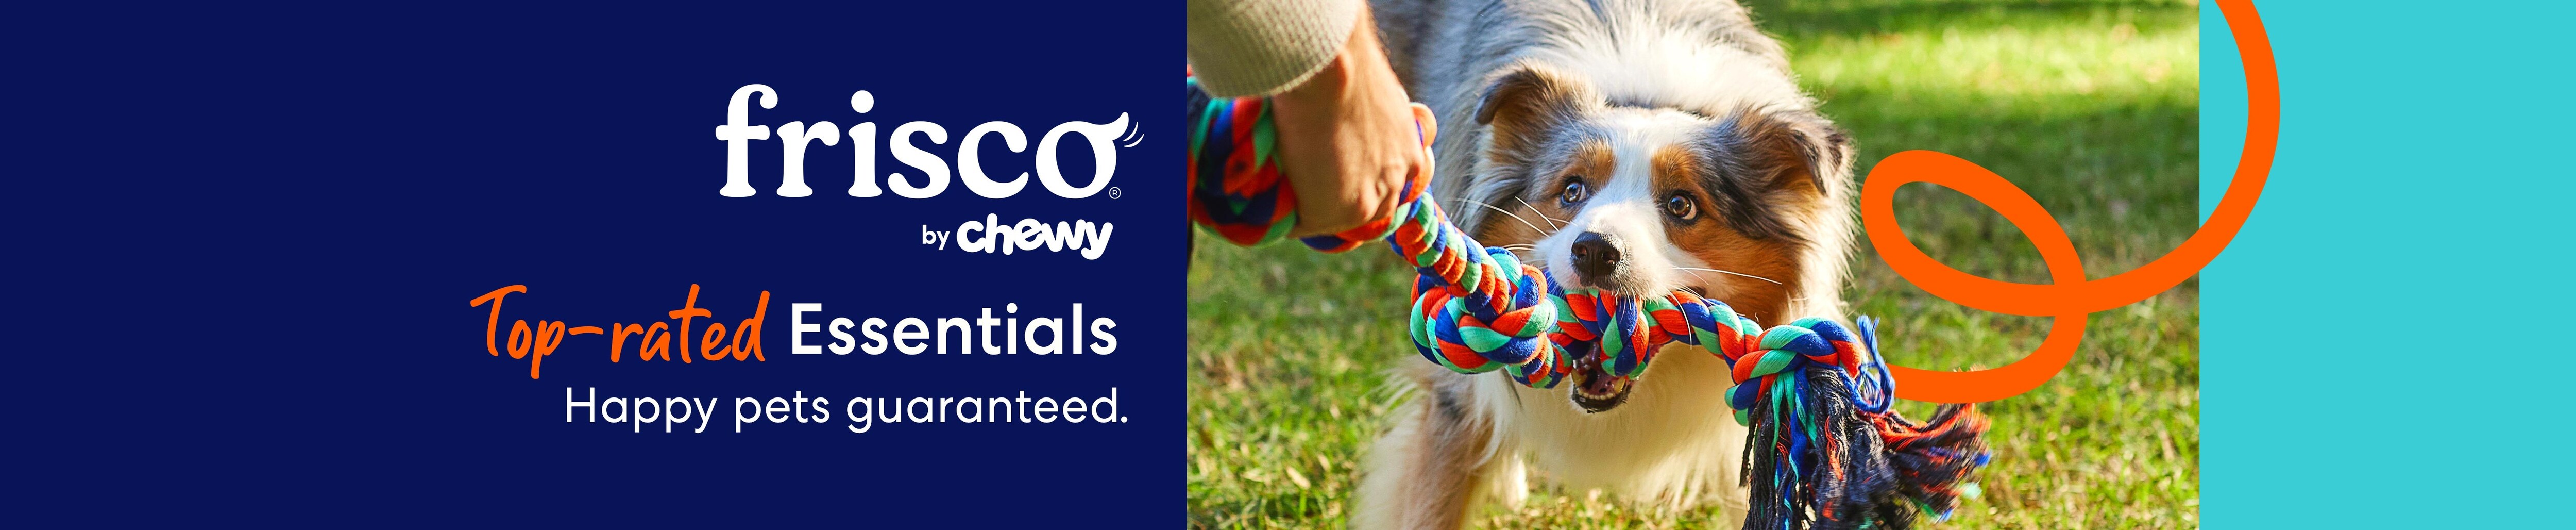 Frisco by Chewy. Top-rated Essential. Happy pets guaranteed.